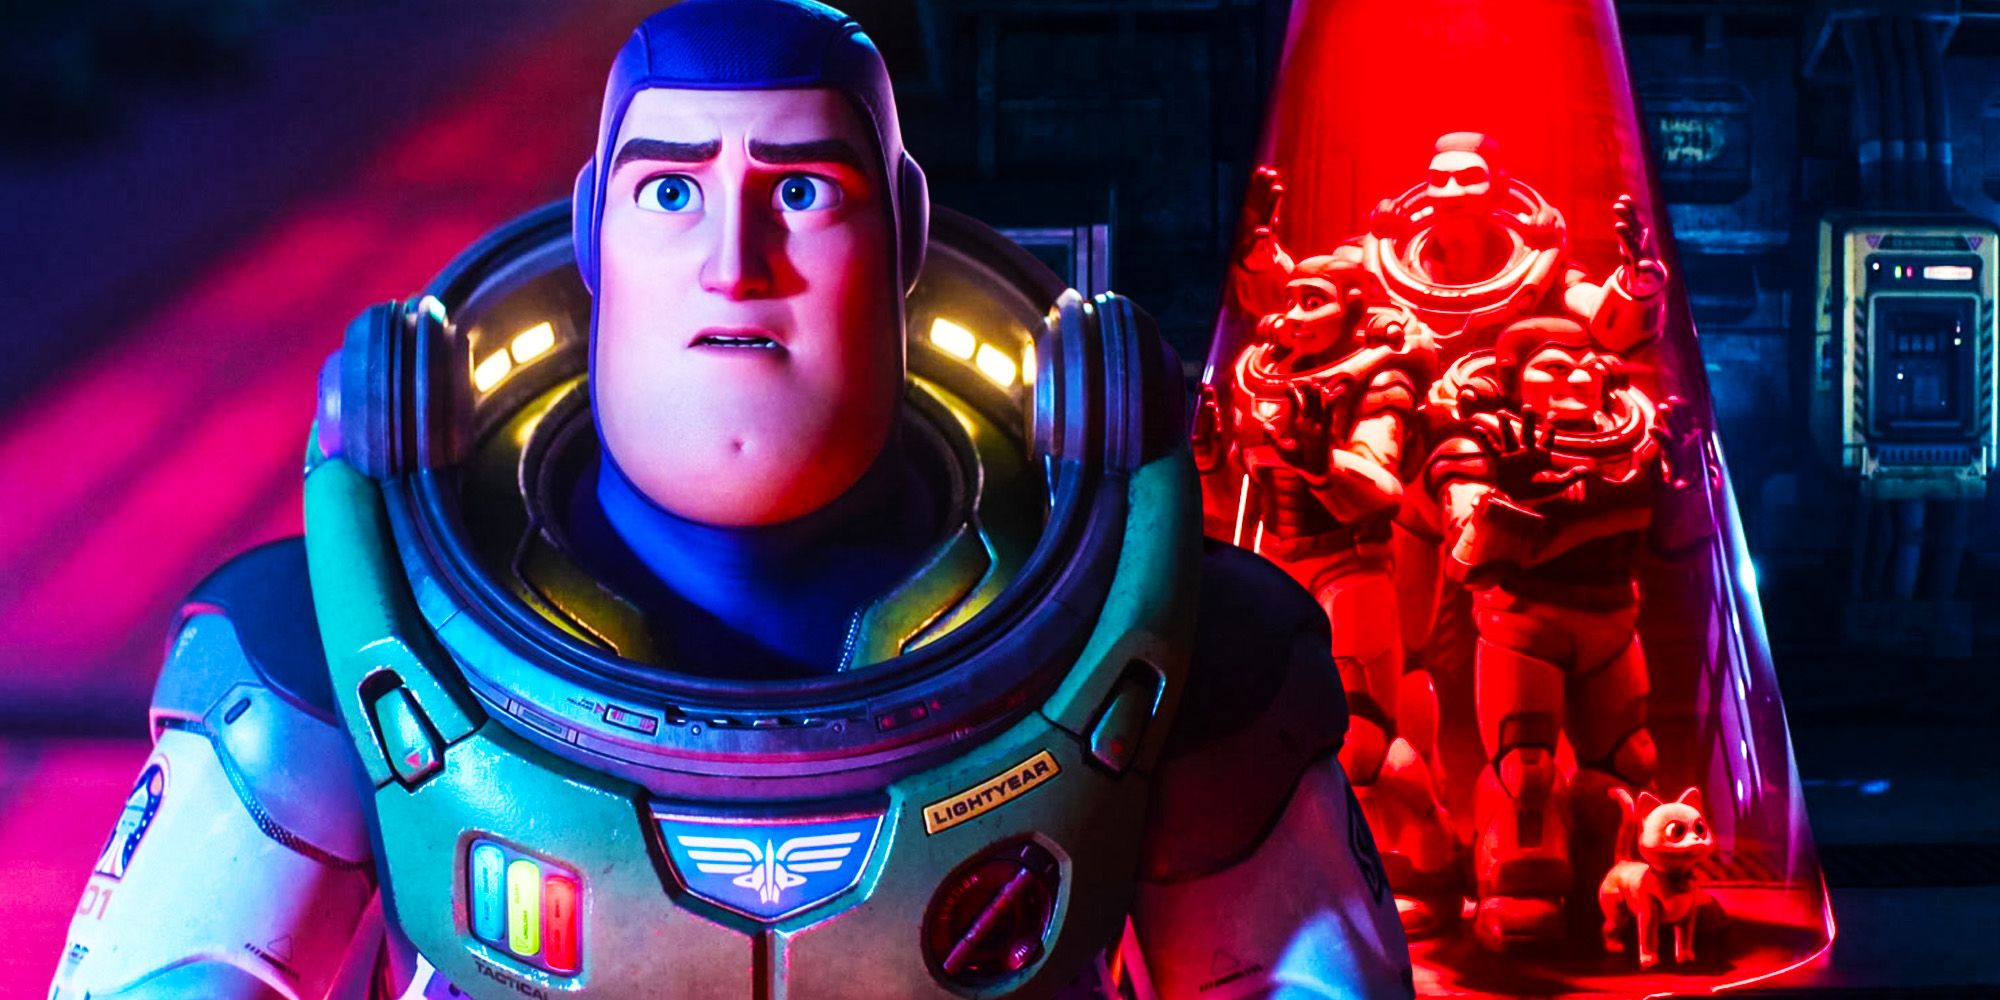 SS Dolan Dark @DolanDark Why does the new Buzz Lightyear trailer look like  a this pic